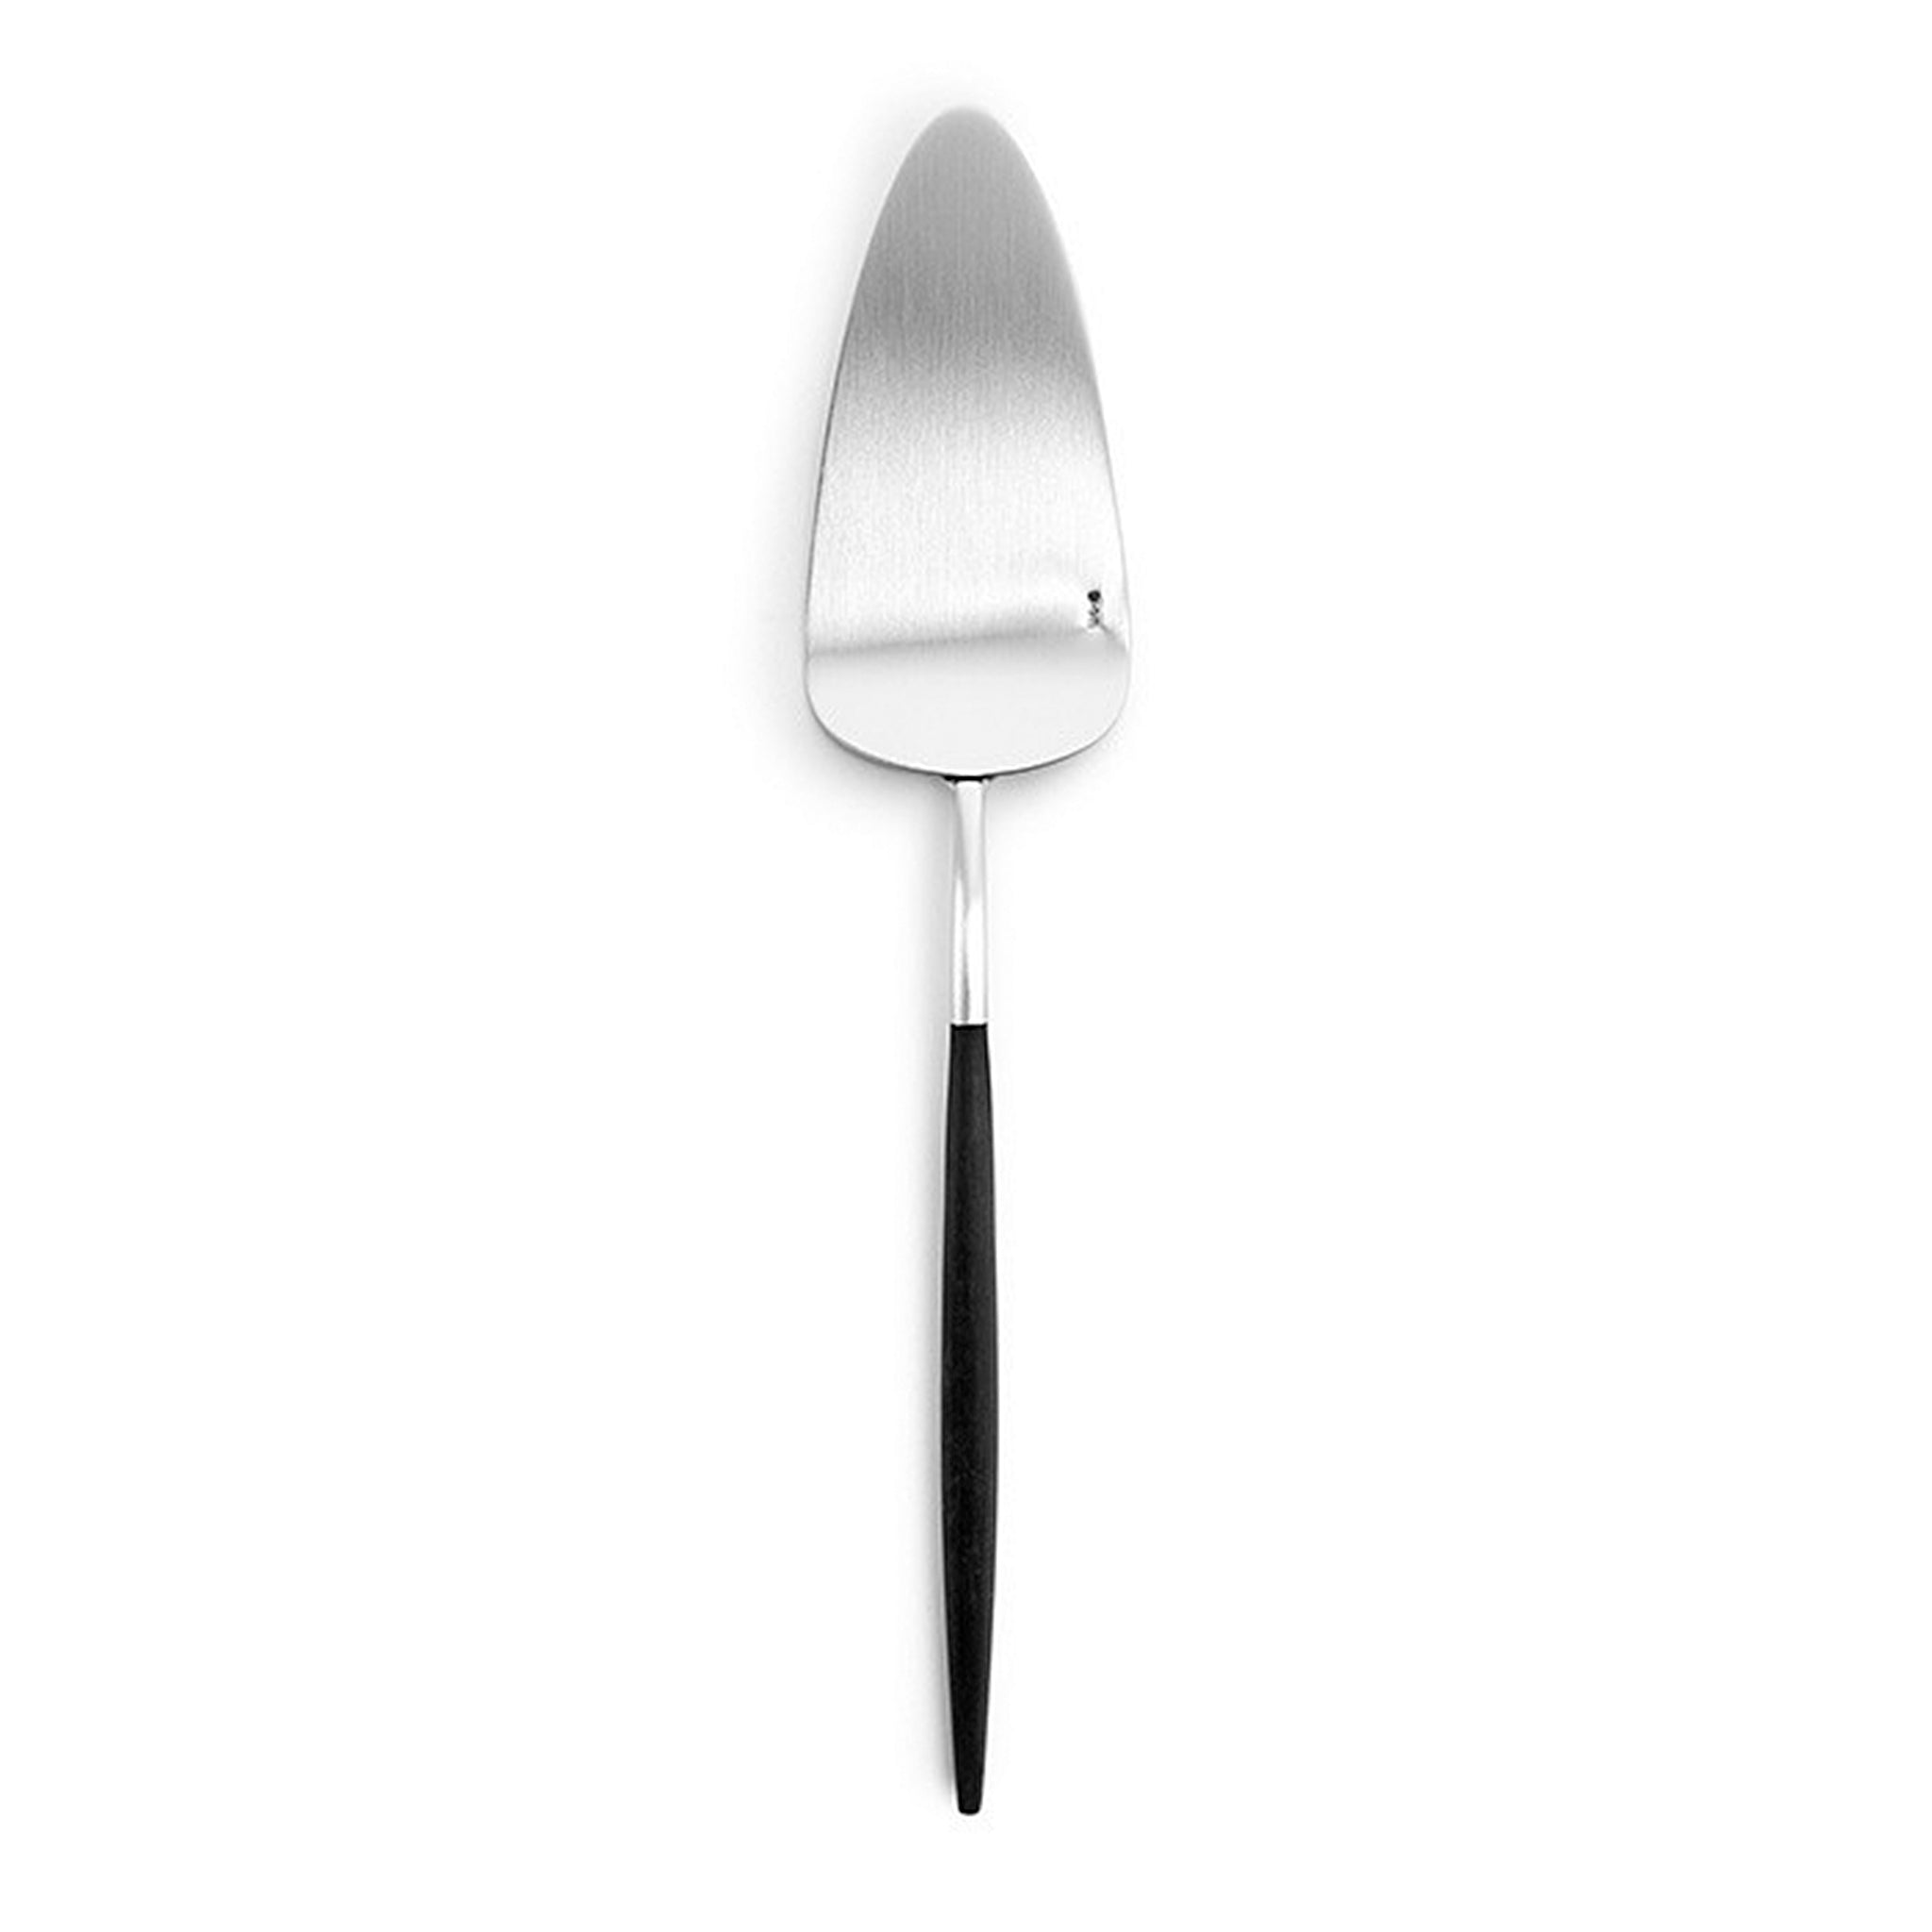 Some heft and a slender shape make for plating perfect slivers of all the pies. Cutipol Goa Black / Lolo Brushed pastry serving knife.